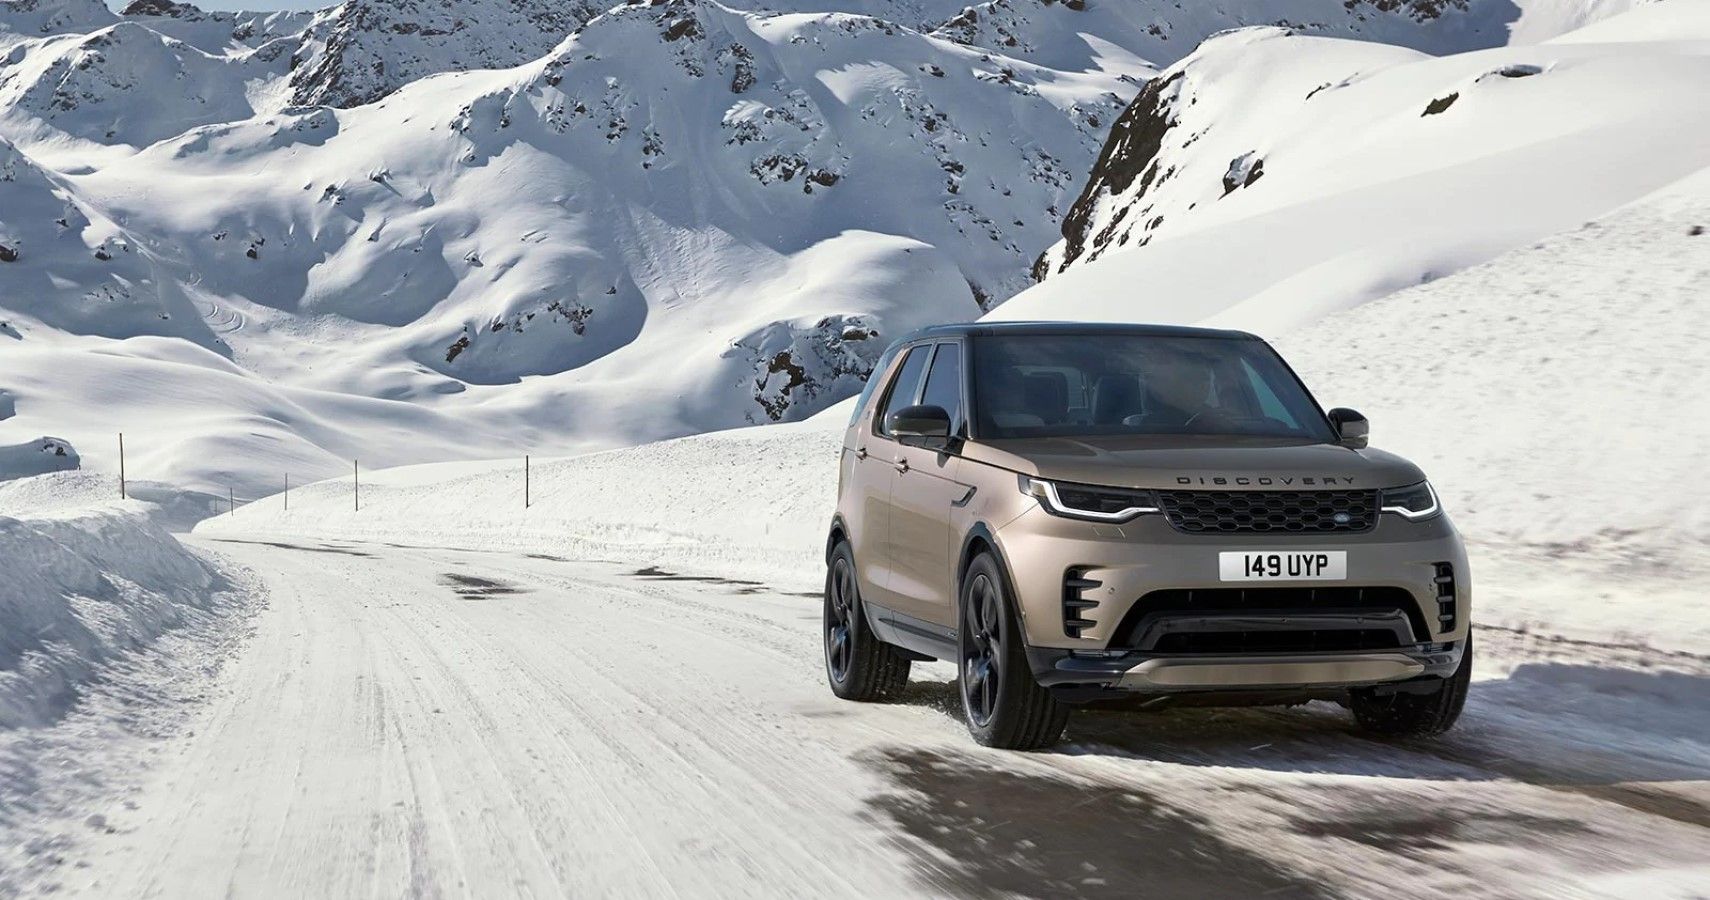 2022 Land Rover Discovery front third quarter view in snow